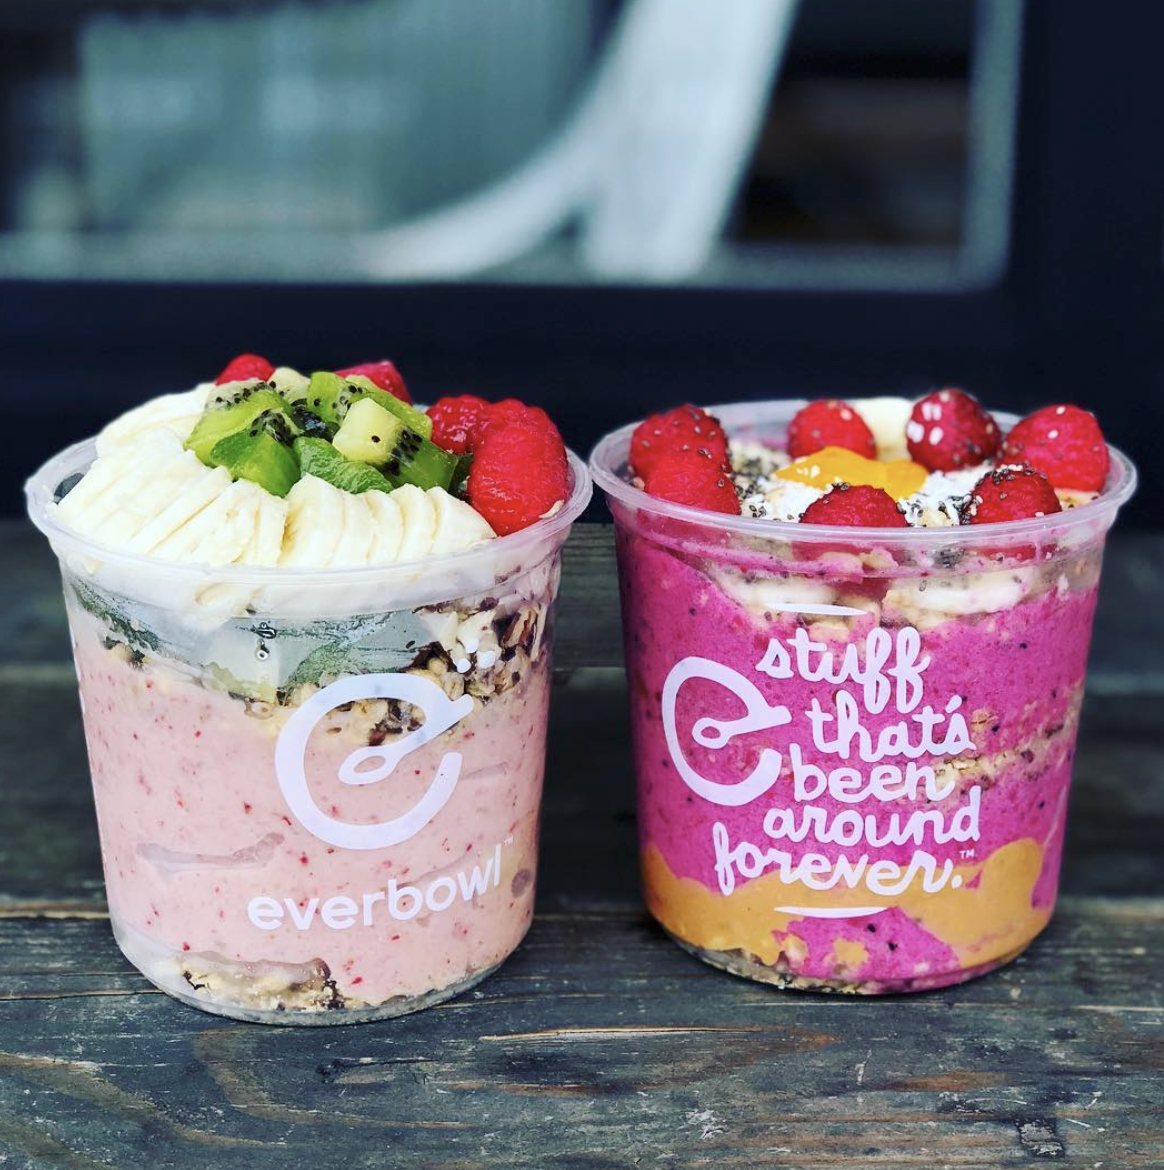 SanDiegoVille: Superfood Bowls & Smoothie Concept To Take Over San Diego | Everbowl To ...